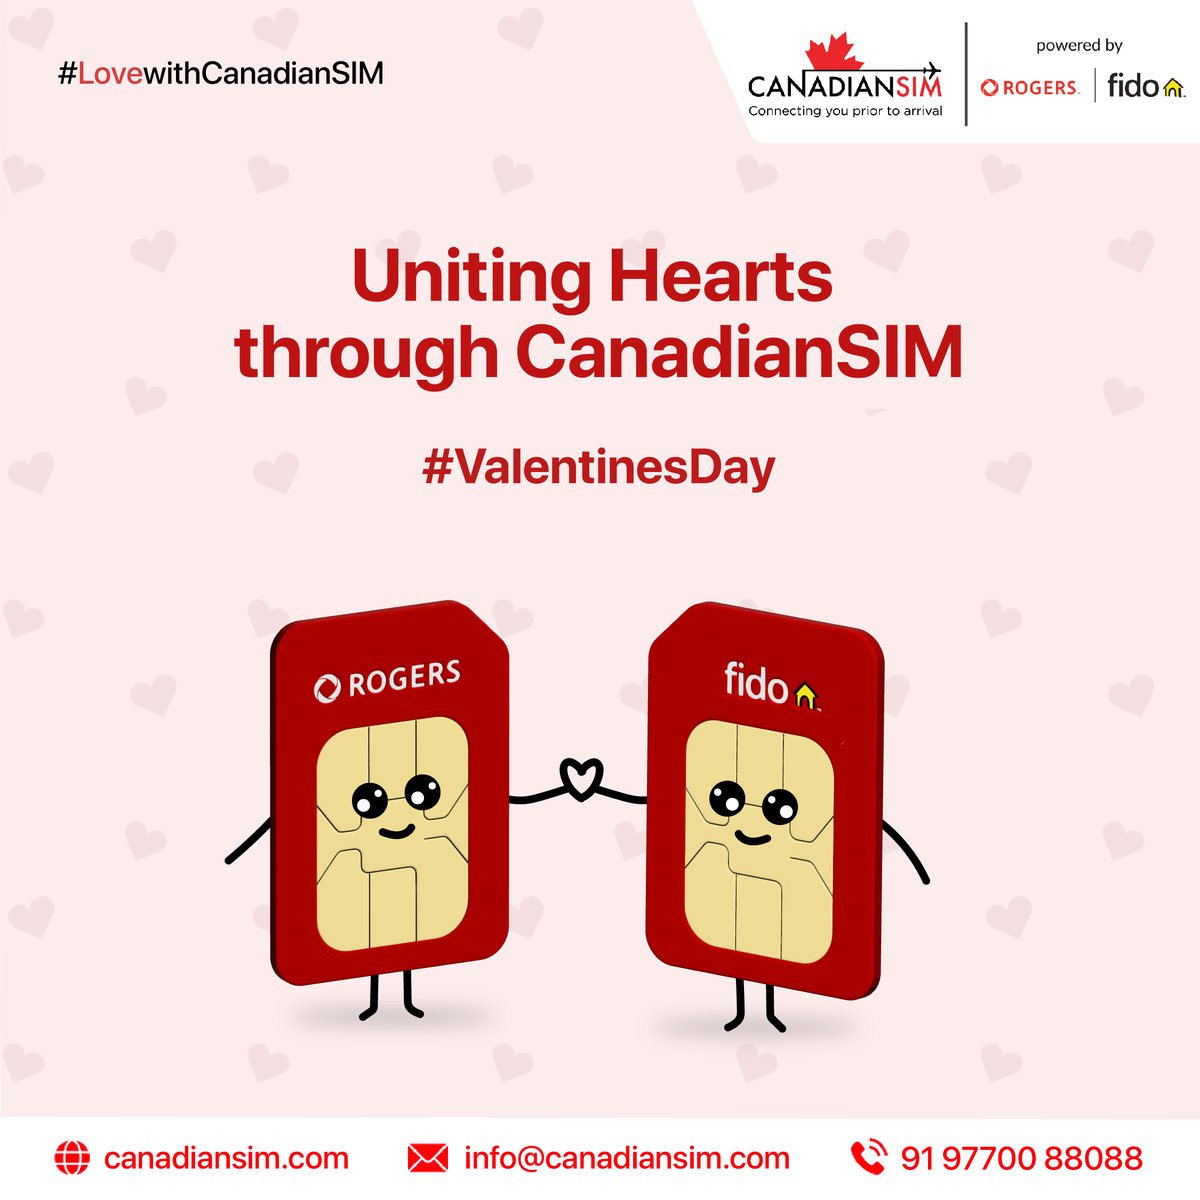 Find your perfect pair with CanadianSIM this Valentine's Day! Like Rogers and Fido, let's connect hearts across miles.
#LoveWithCanadianSIM #UnitingHearts #ValentinesDay #canadianSIM #valentinesday2024